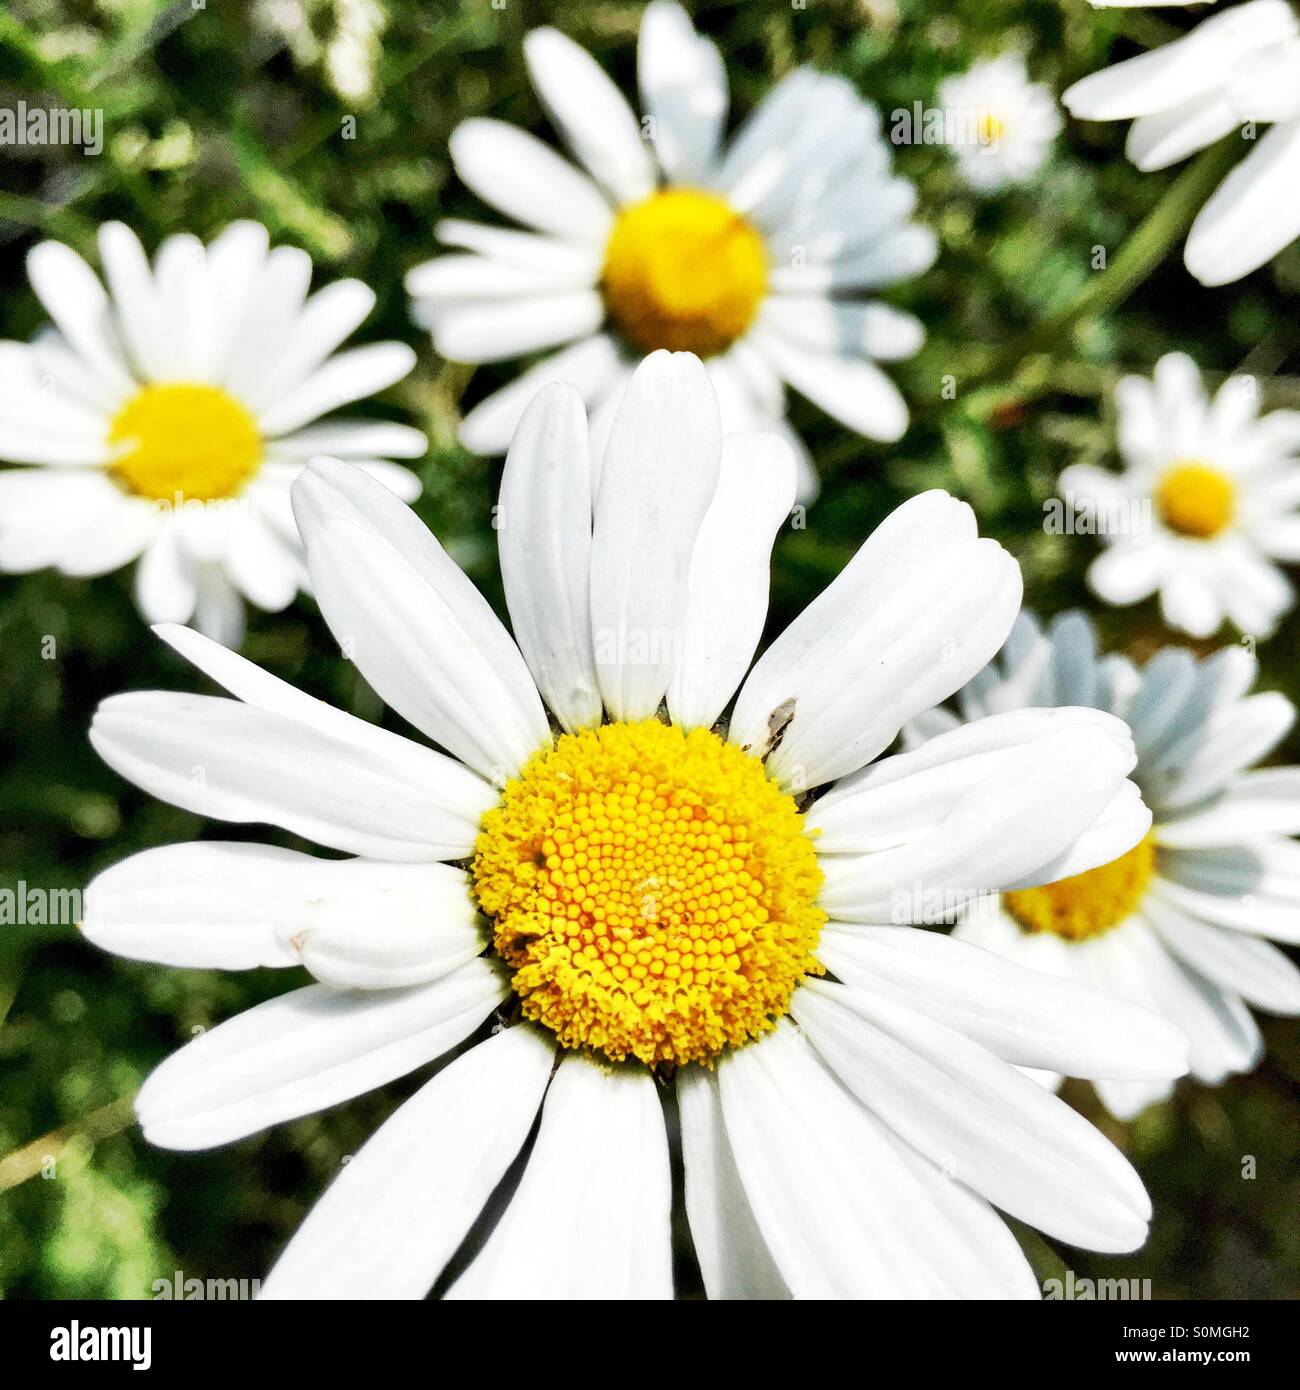 Daisies in a field Stock Photo